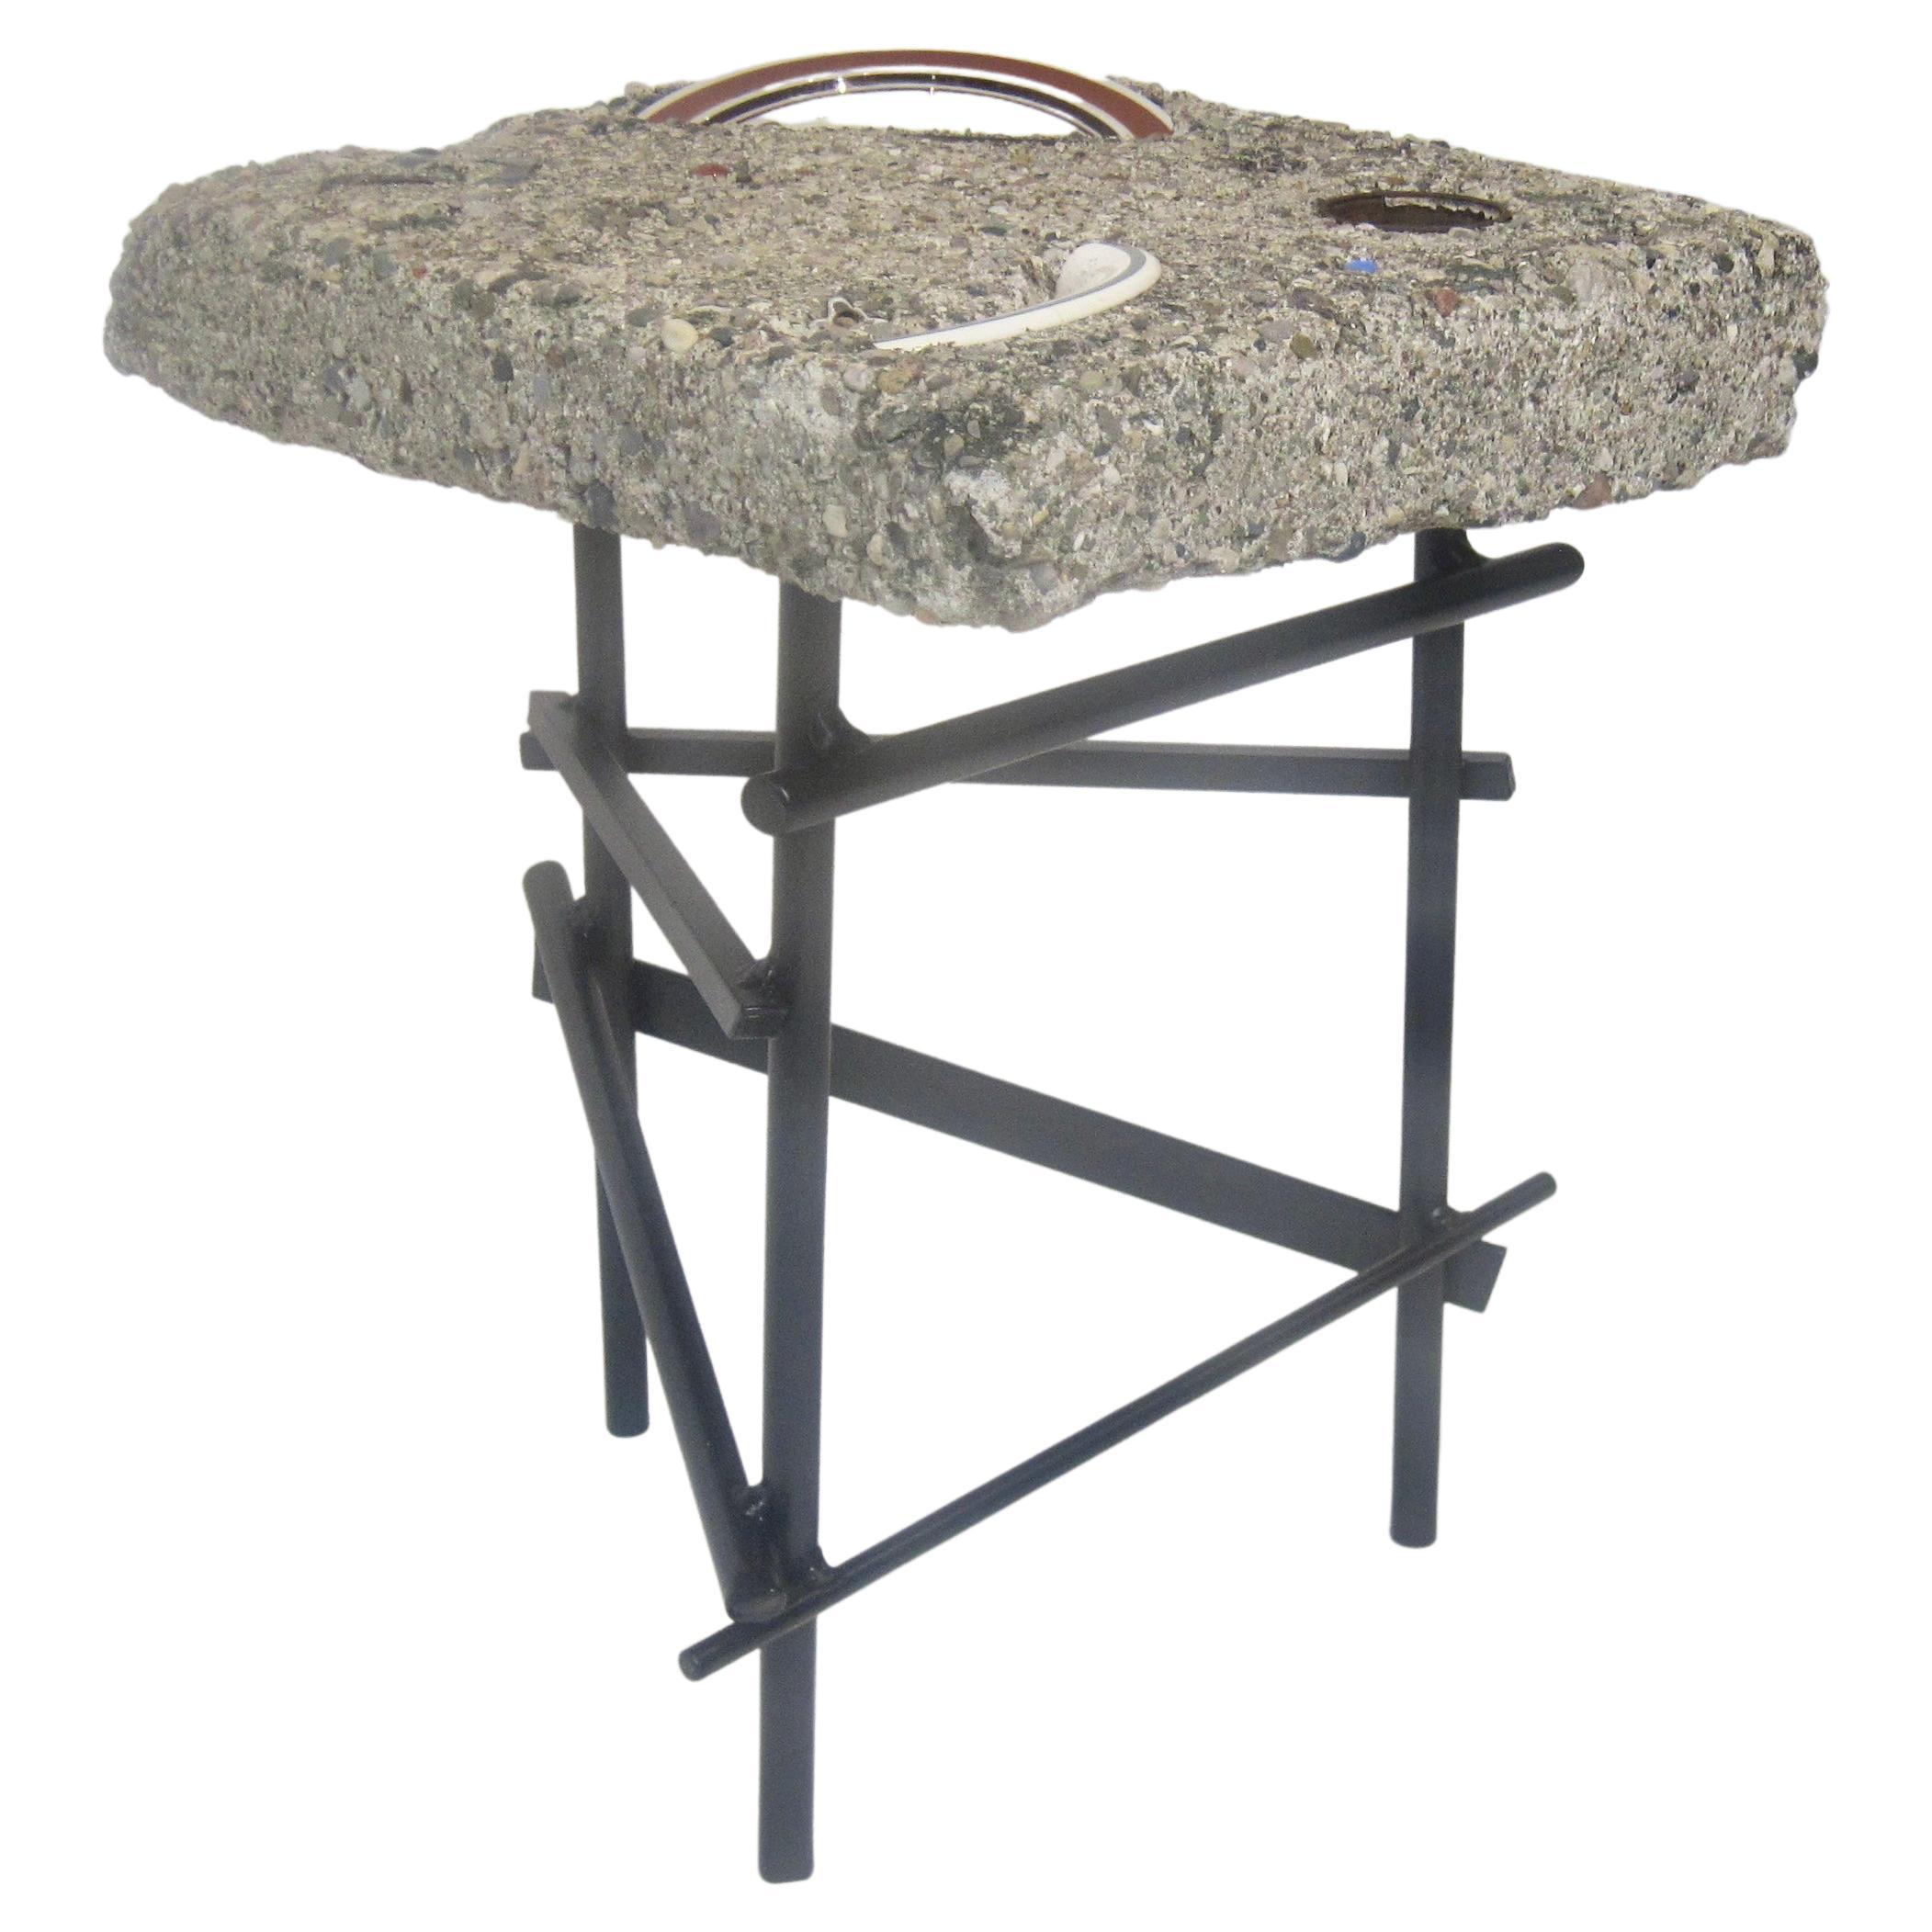 Studio Made Found Object Cement Table with Sculptural Steel Base 